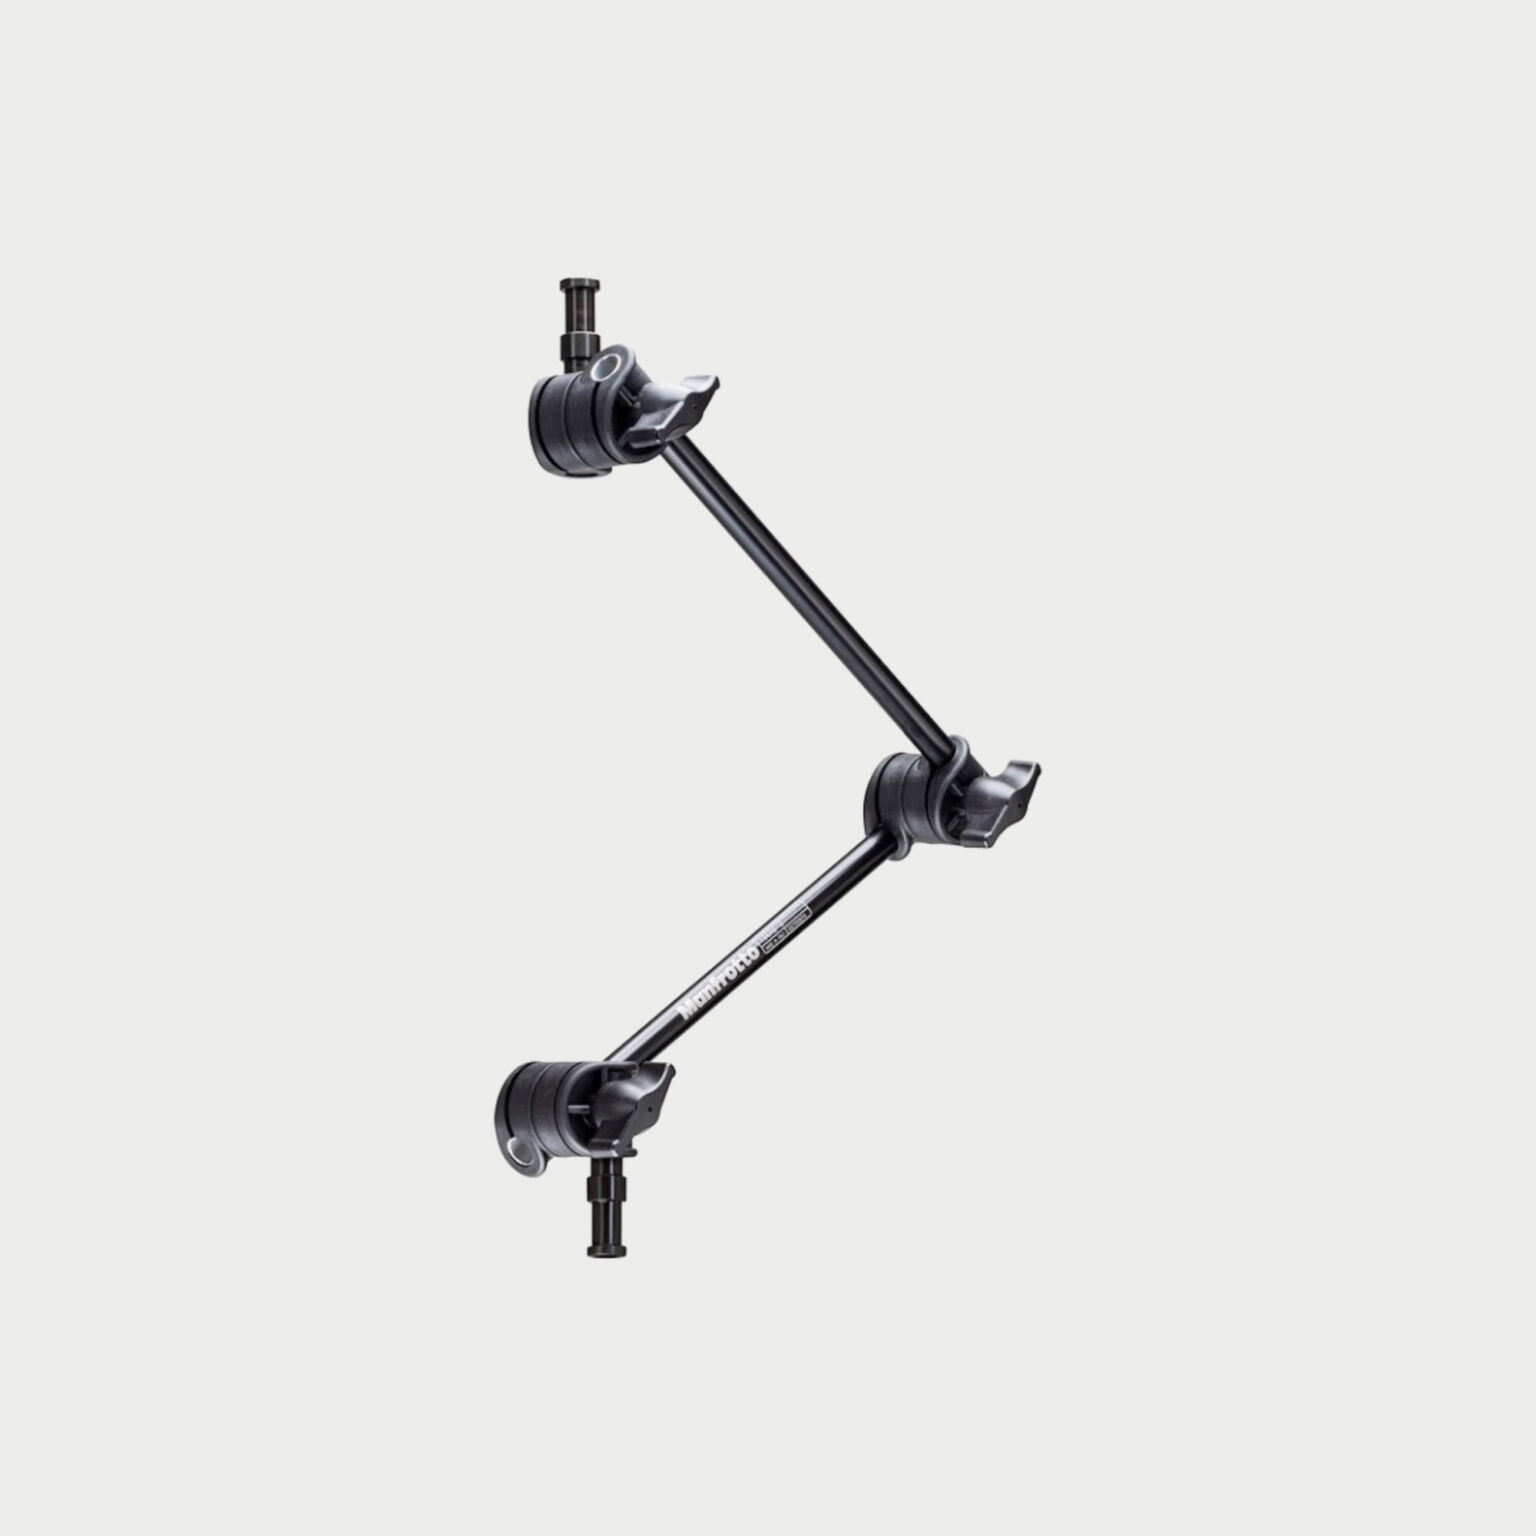 Manfrotto Single Arm 2 Section